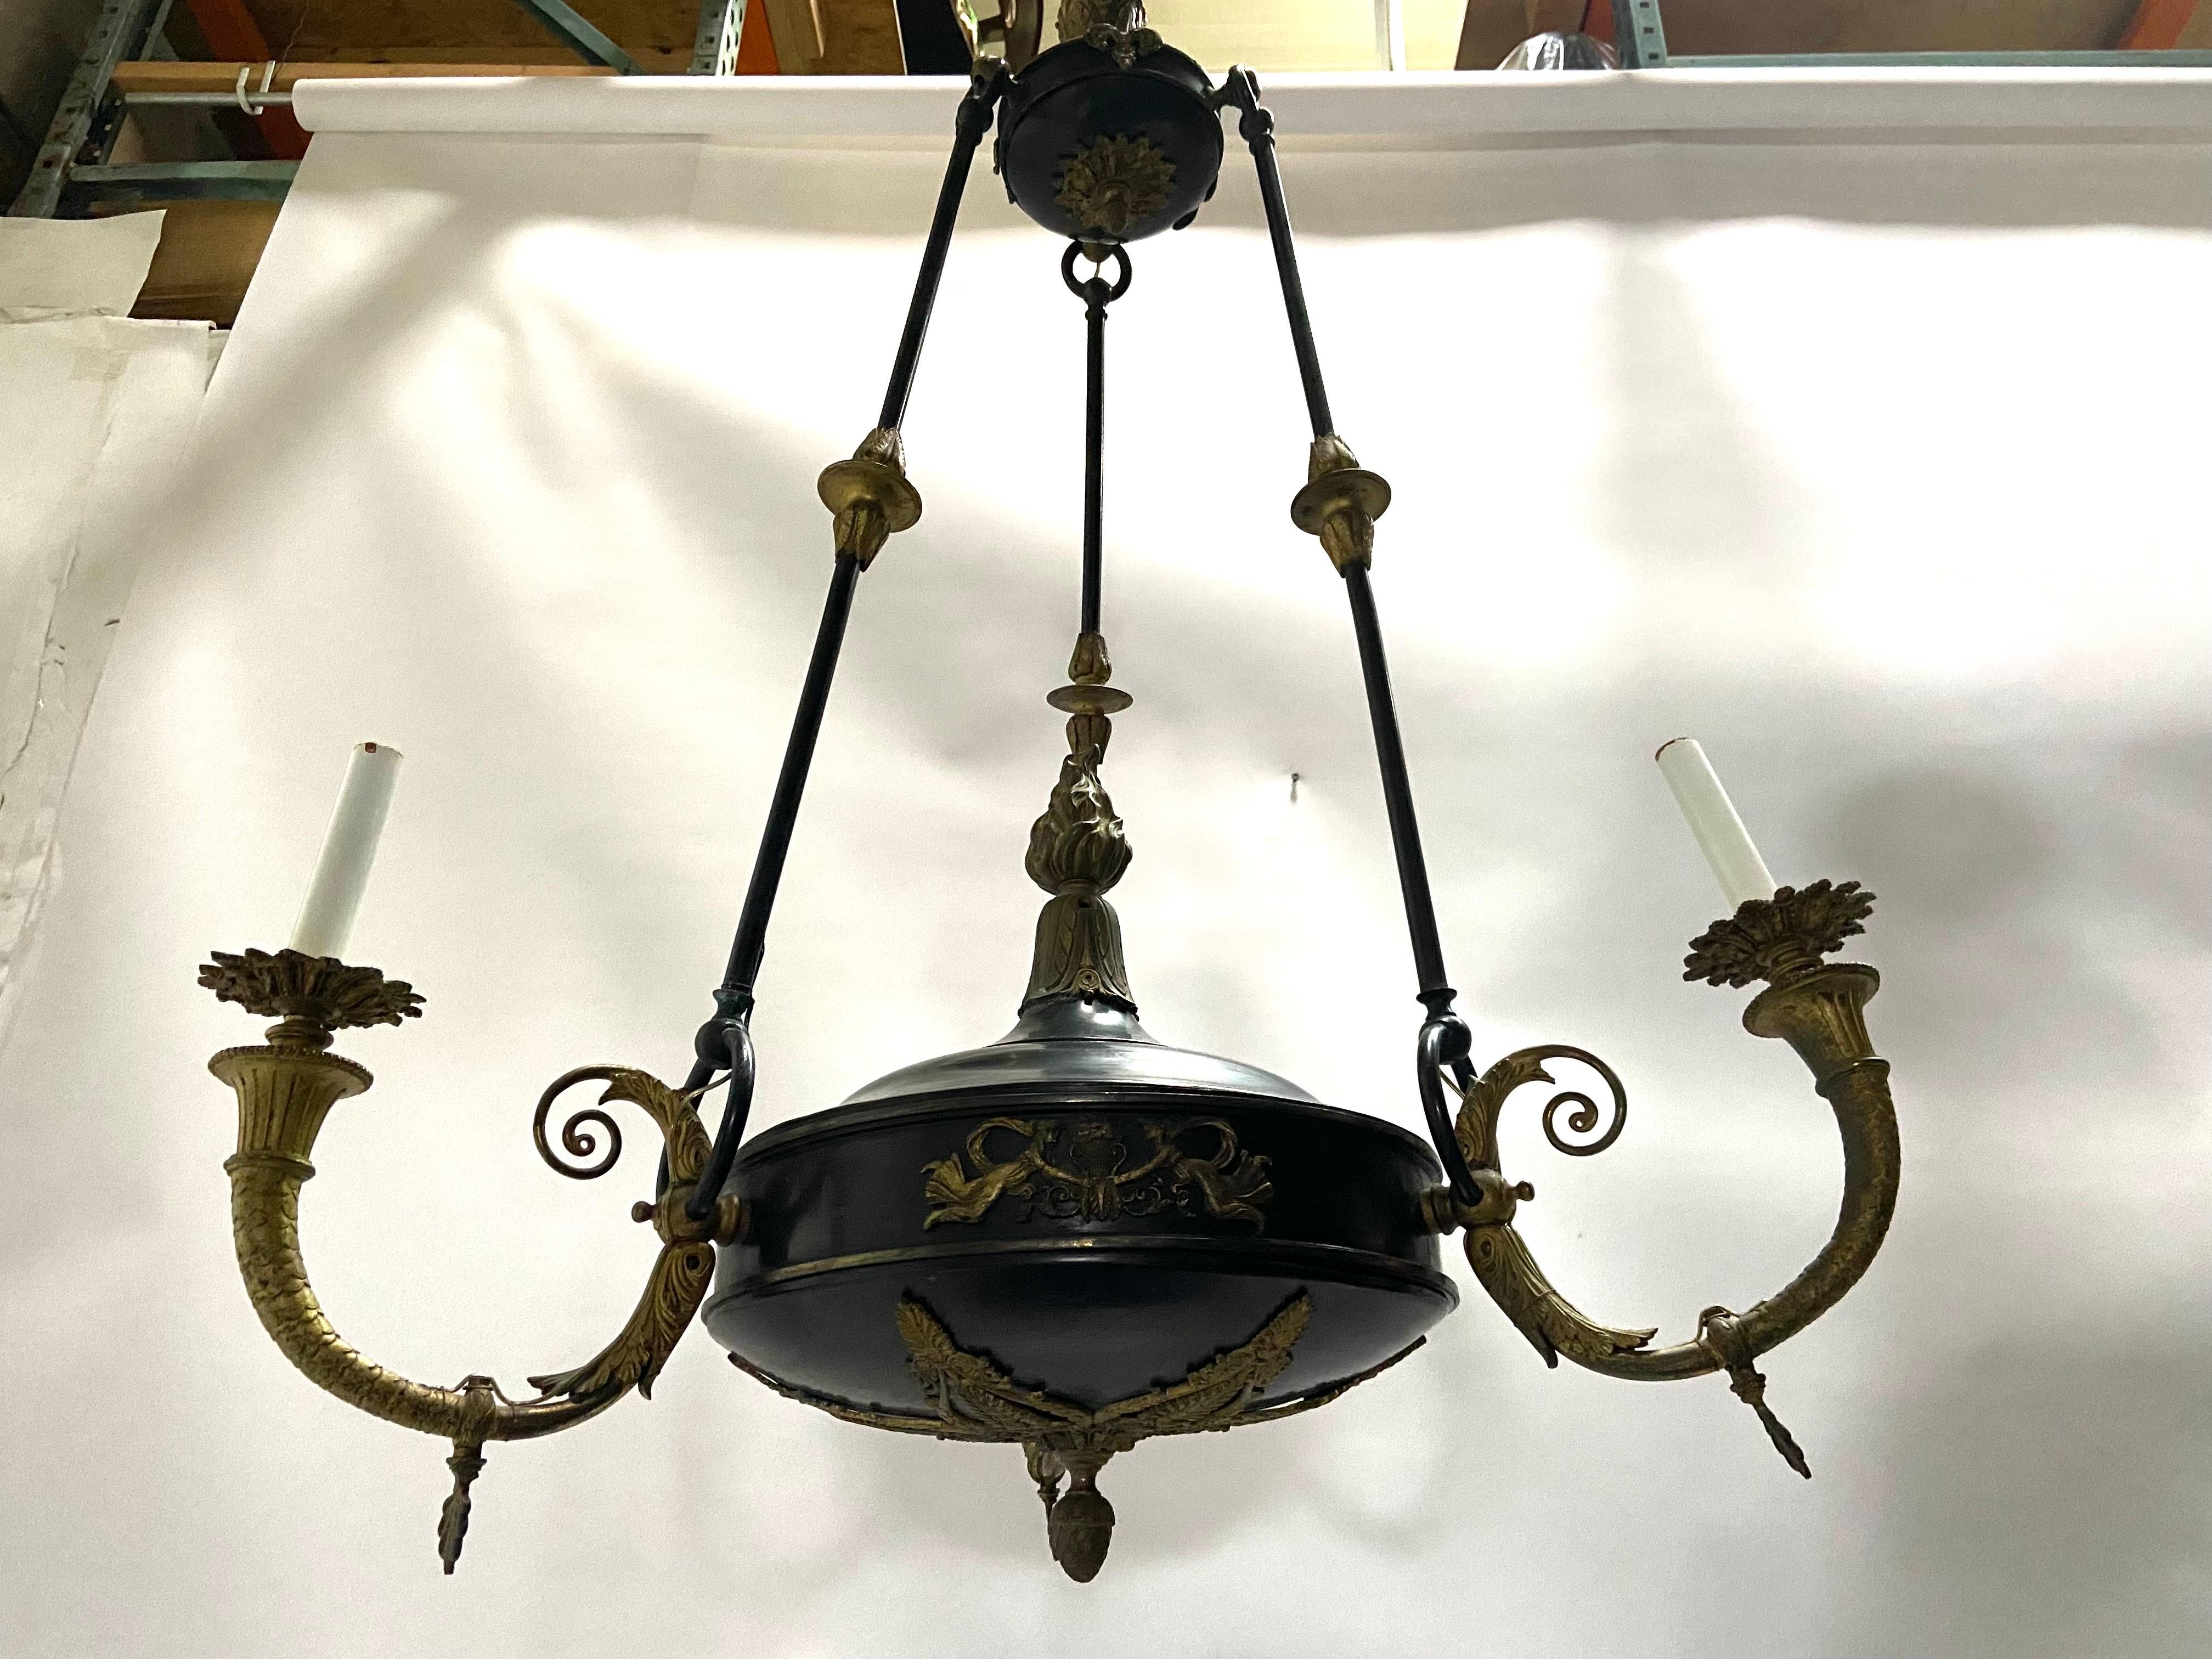 An antique, circa 1900 - 1920, French Empire style bronze three light chandelier. The underside of the chandelier features a highly detailed stylized acanthus leaf pierced ornament with a drop down acorn ornament. Each of the three arms features a